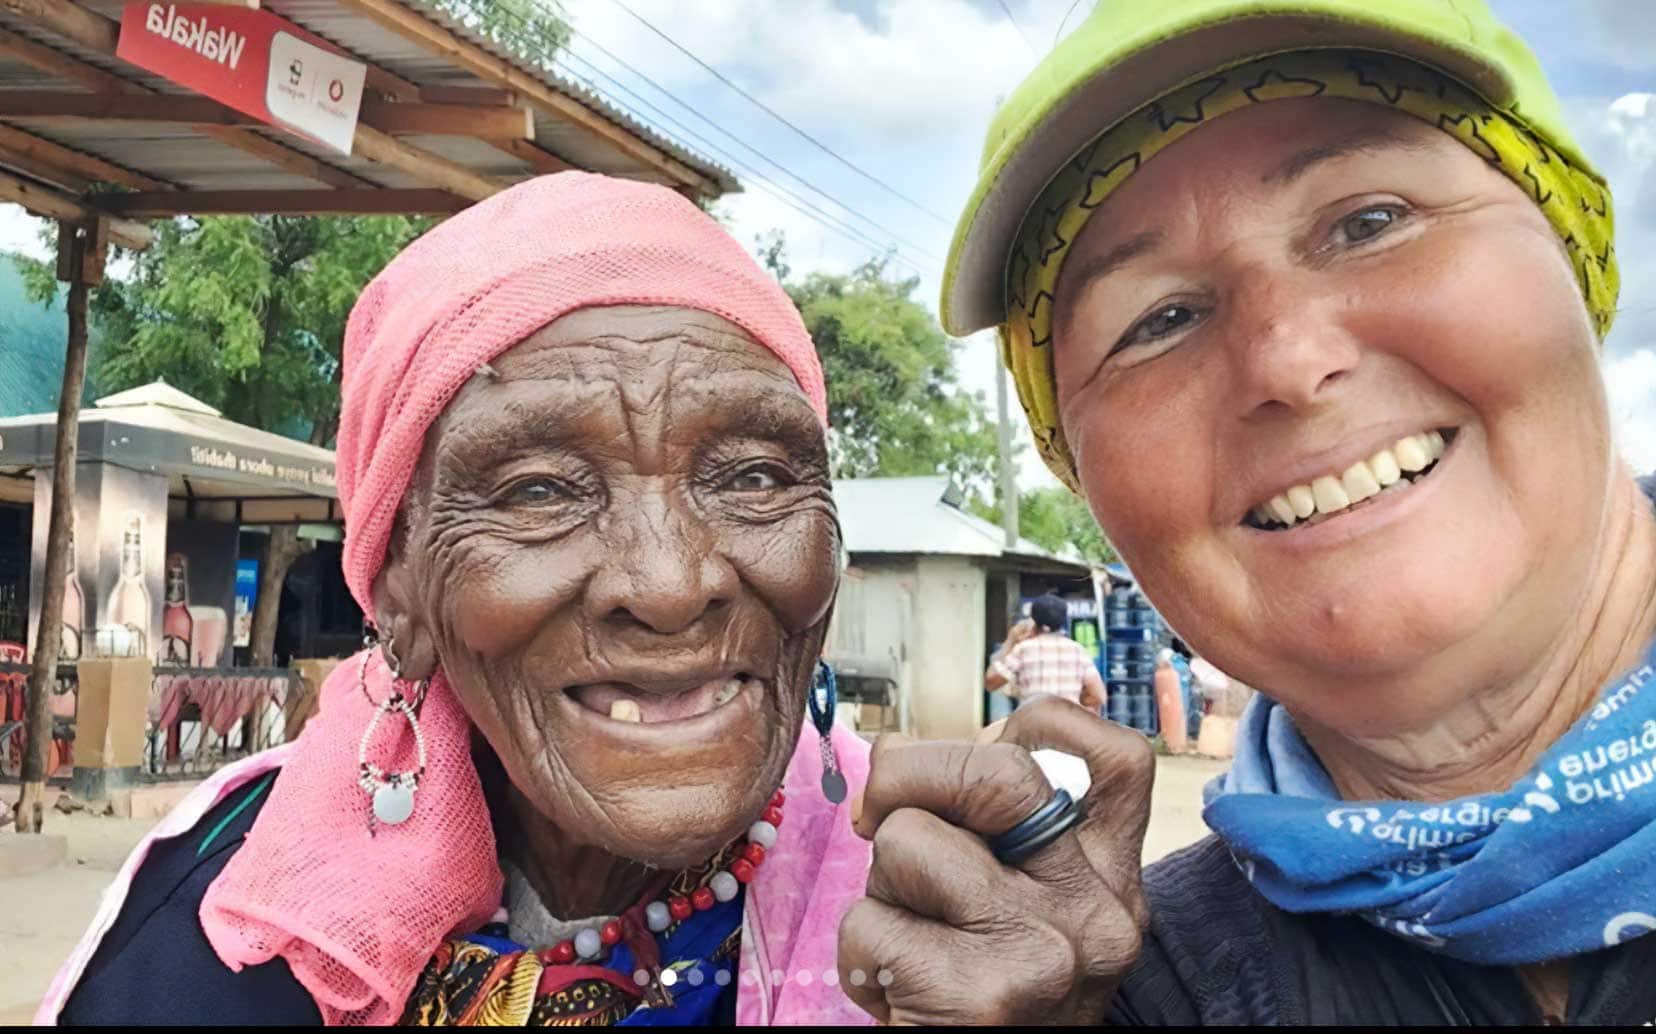 Anna with a bicycle helpmet on beside a smiling dark skinned woman wiuth a pink headscarf, lon earings and several teeth missing